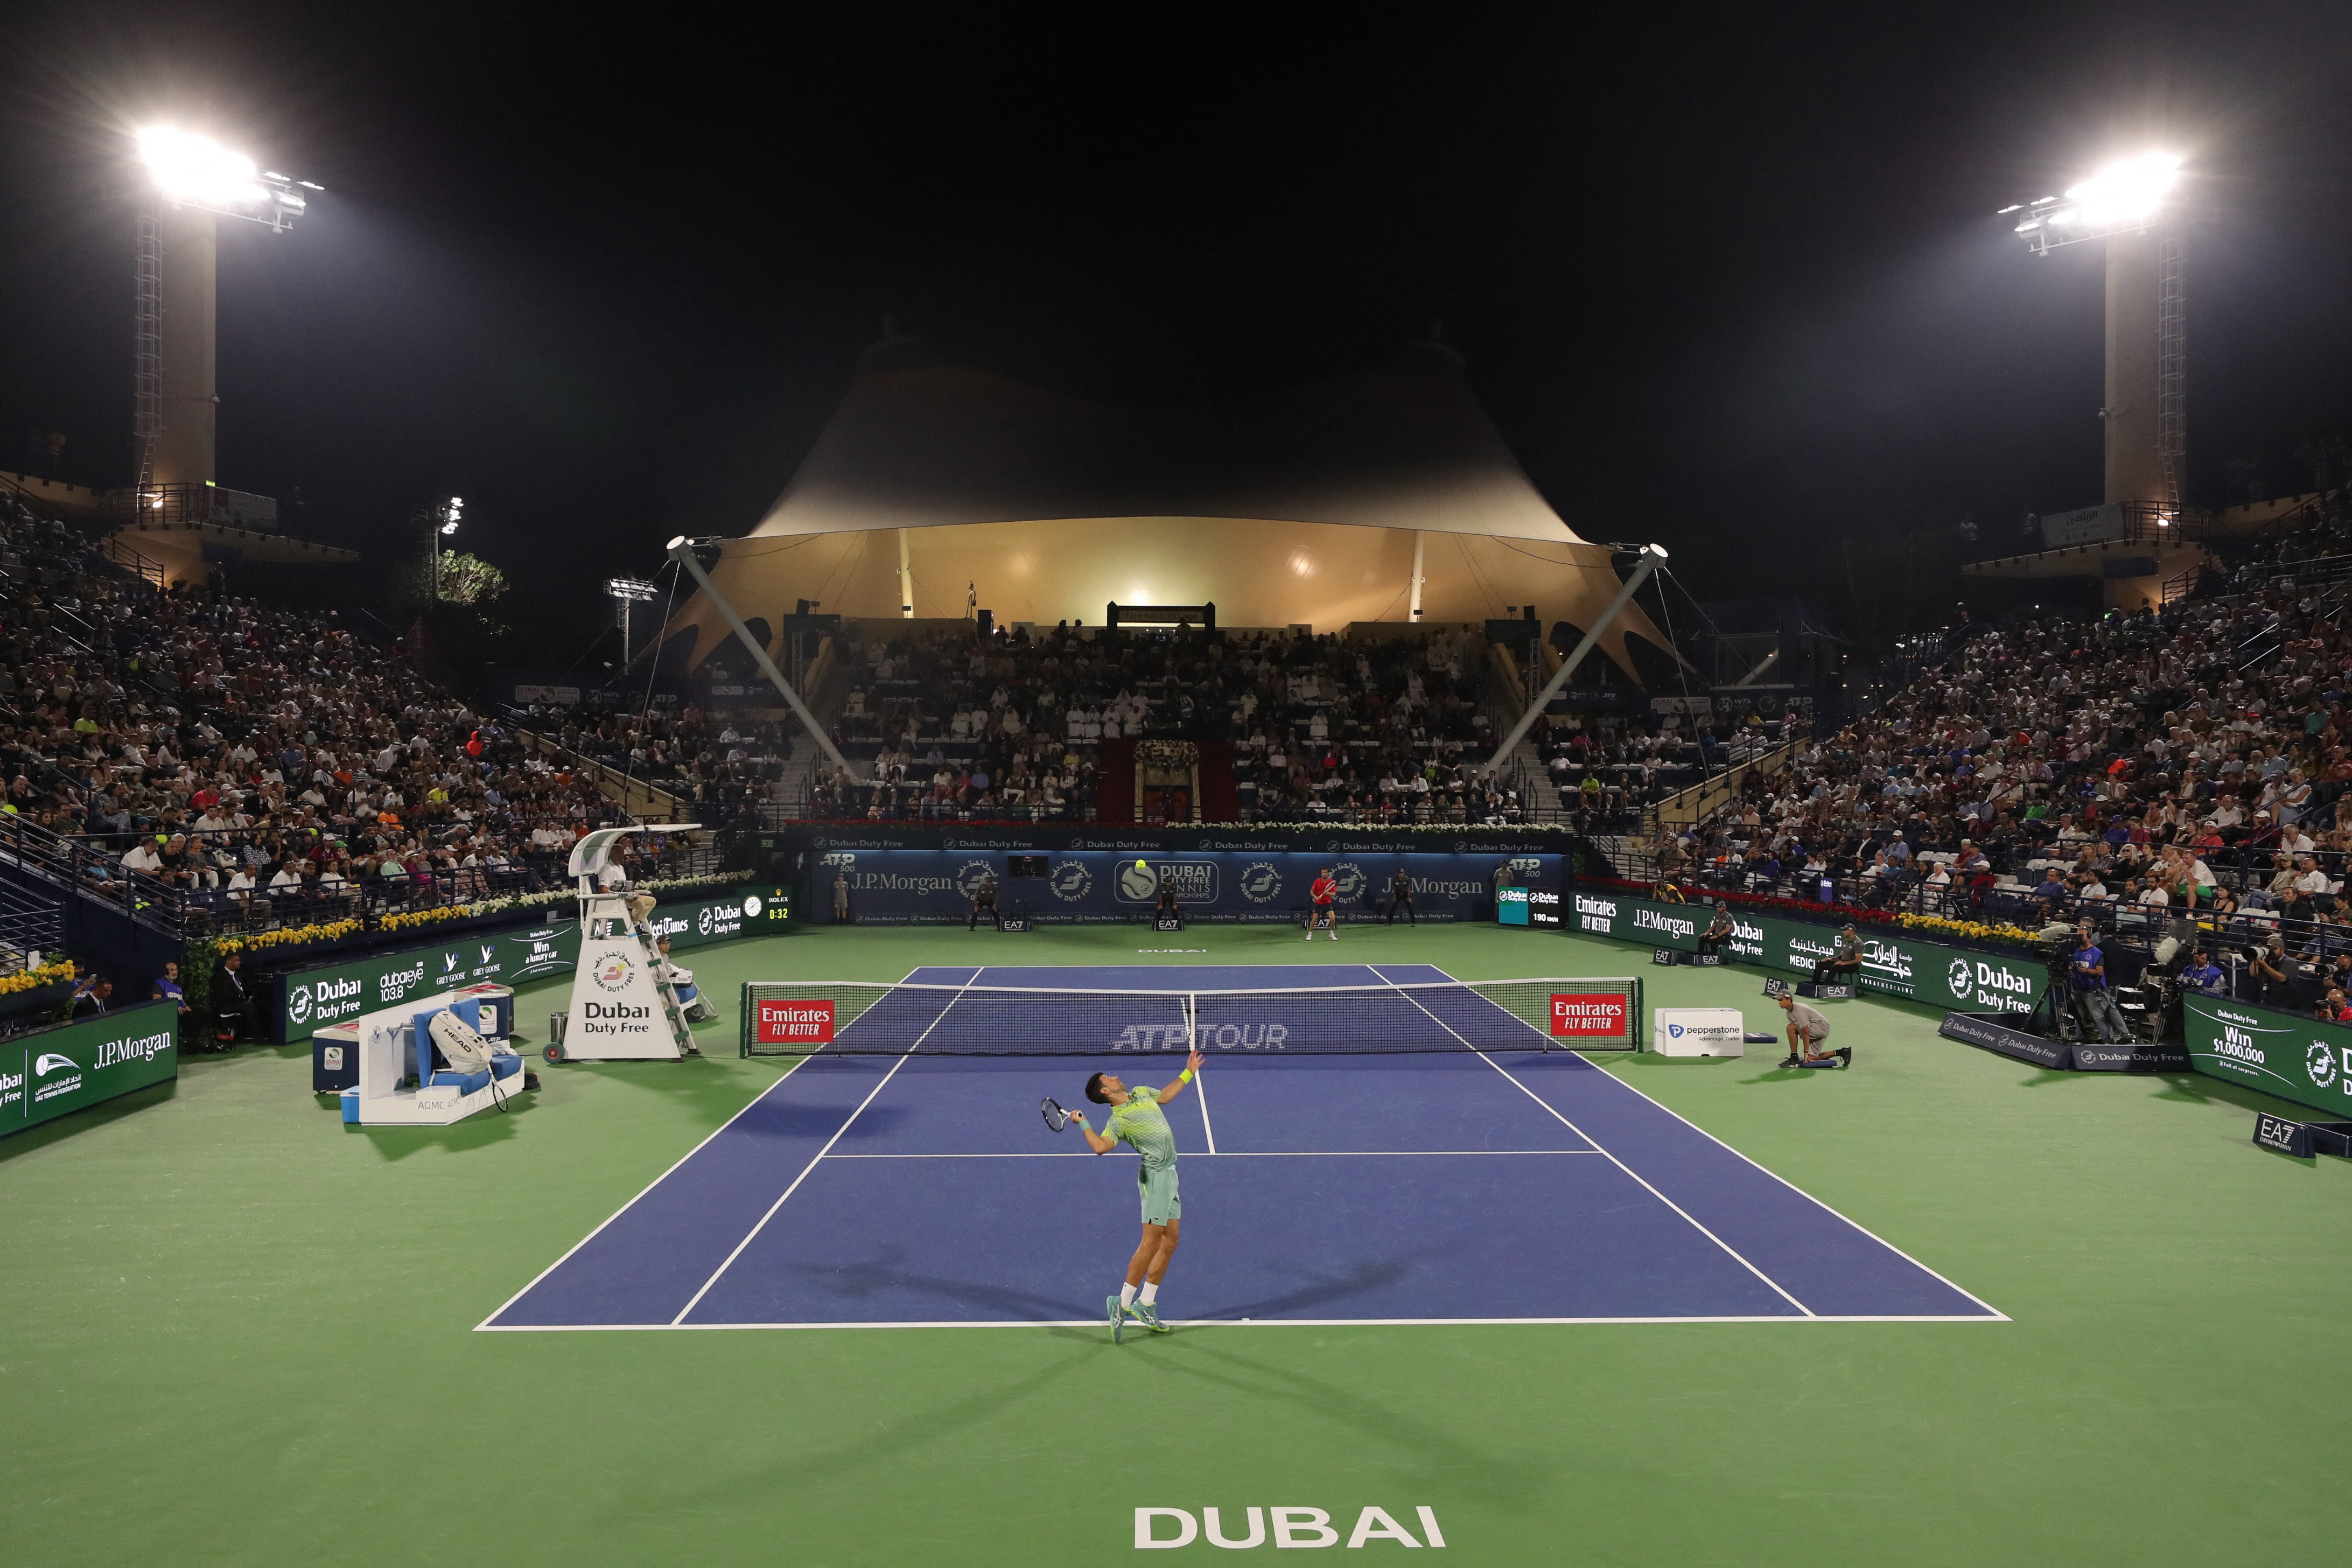 Off court at the Dubai Duty Free Championships: Parties, polo and penguins